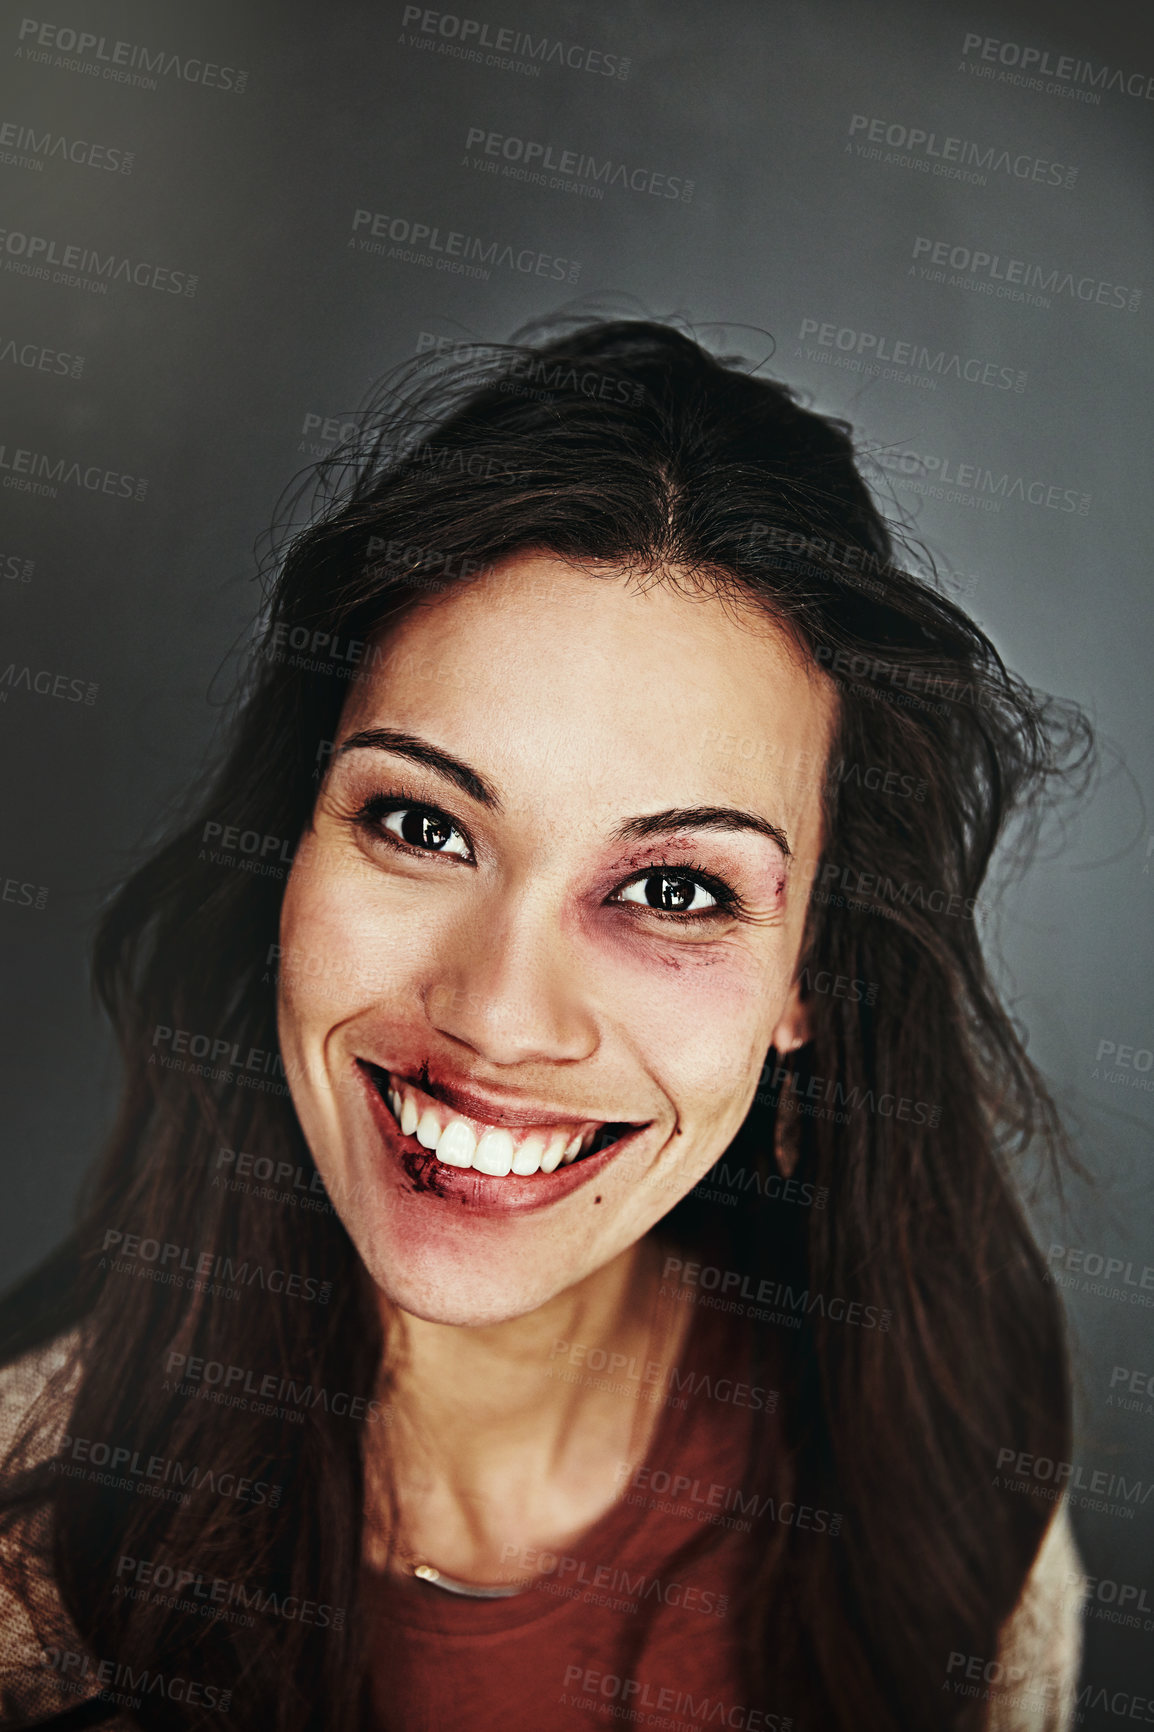 Buy stock photo Cropped portrait of a beaten and bruised young woman